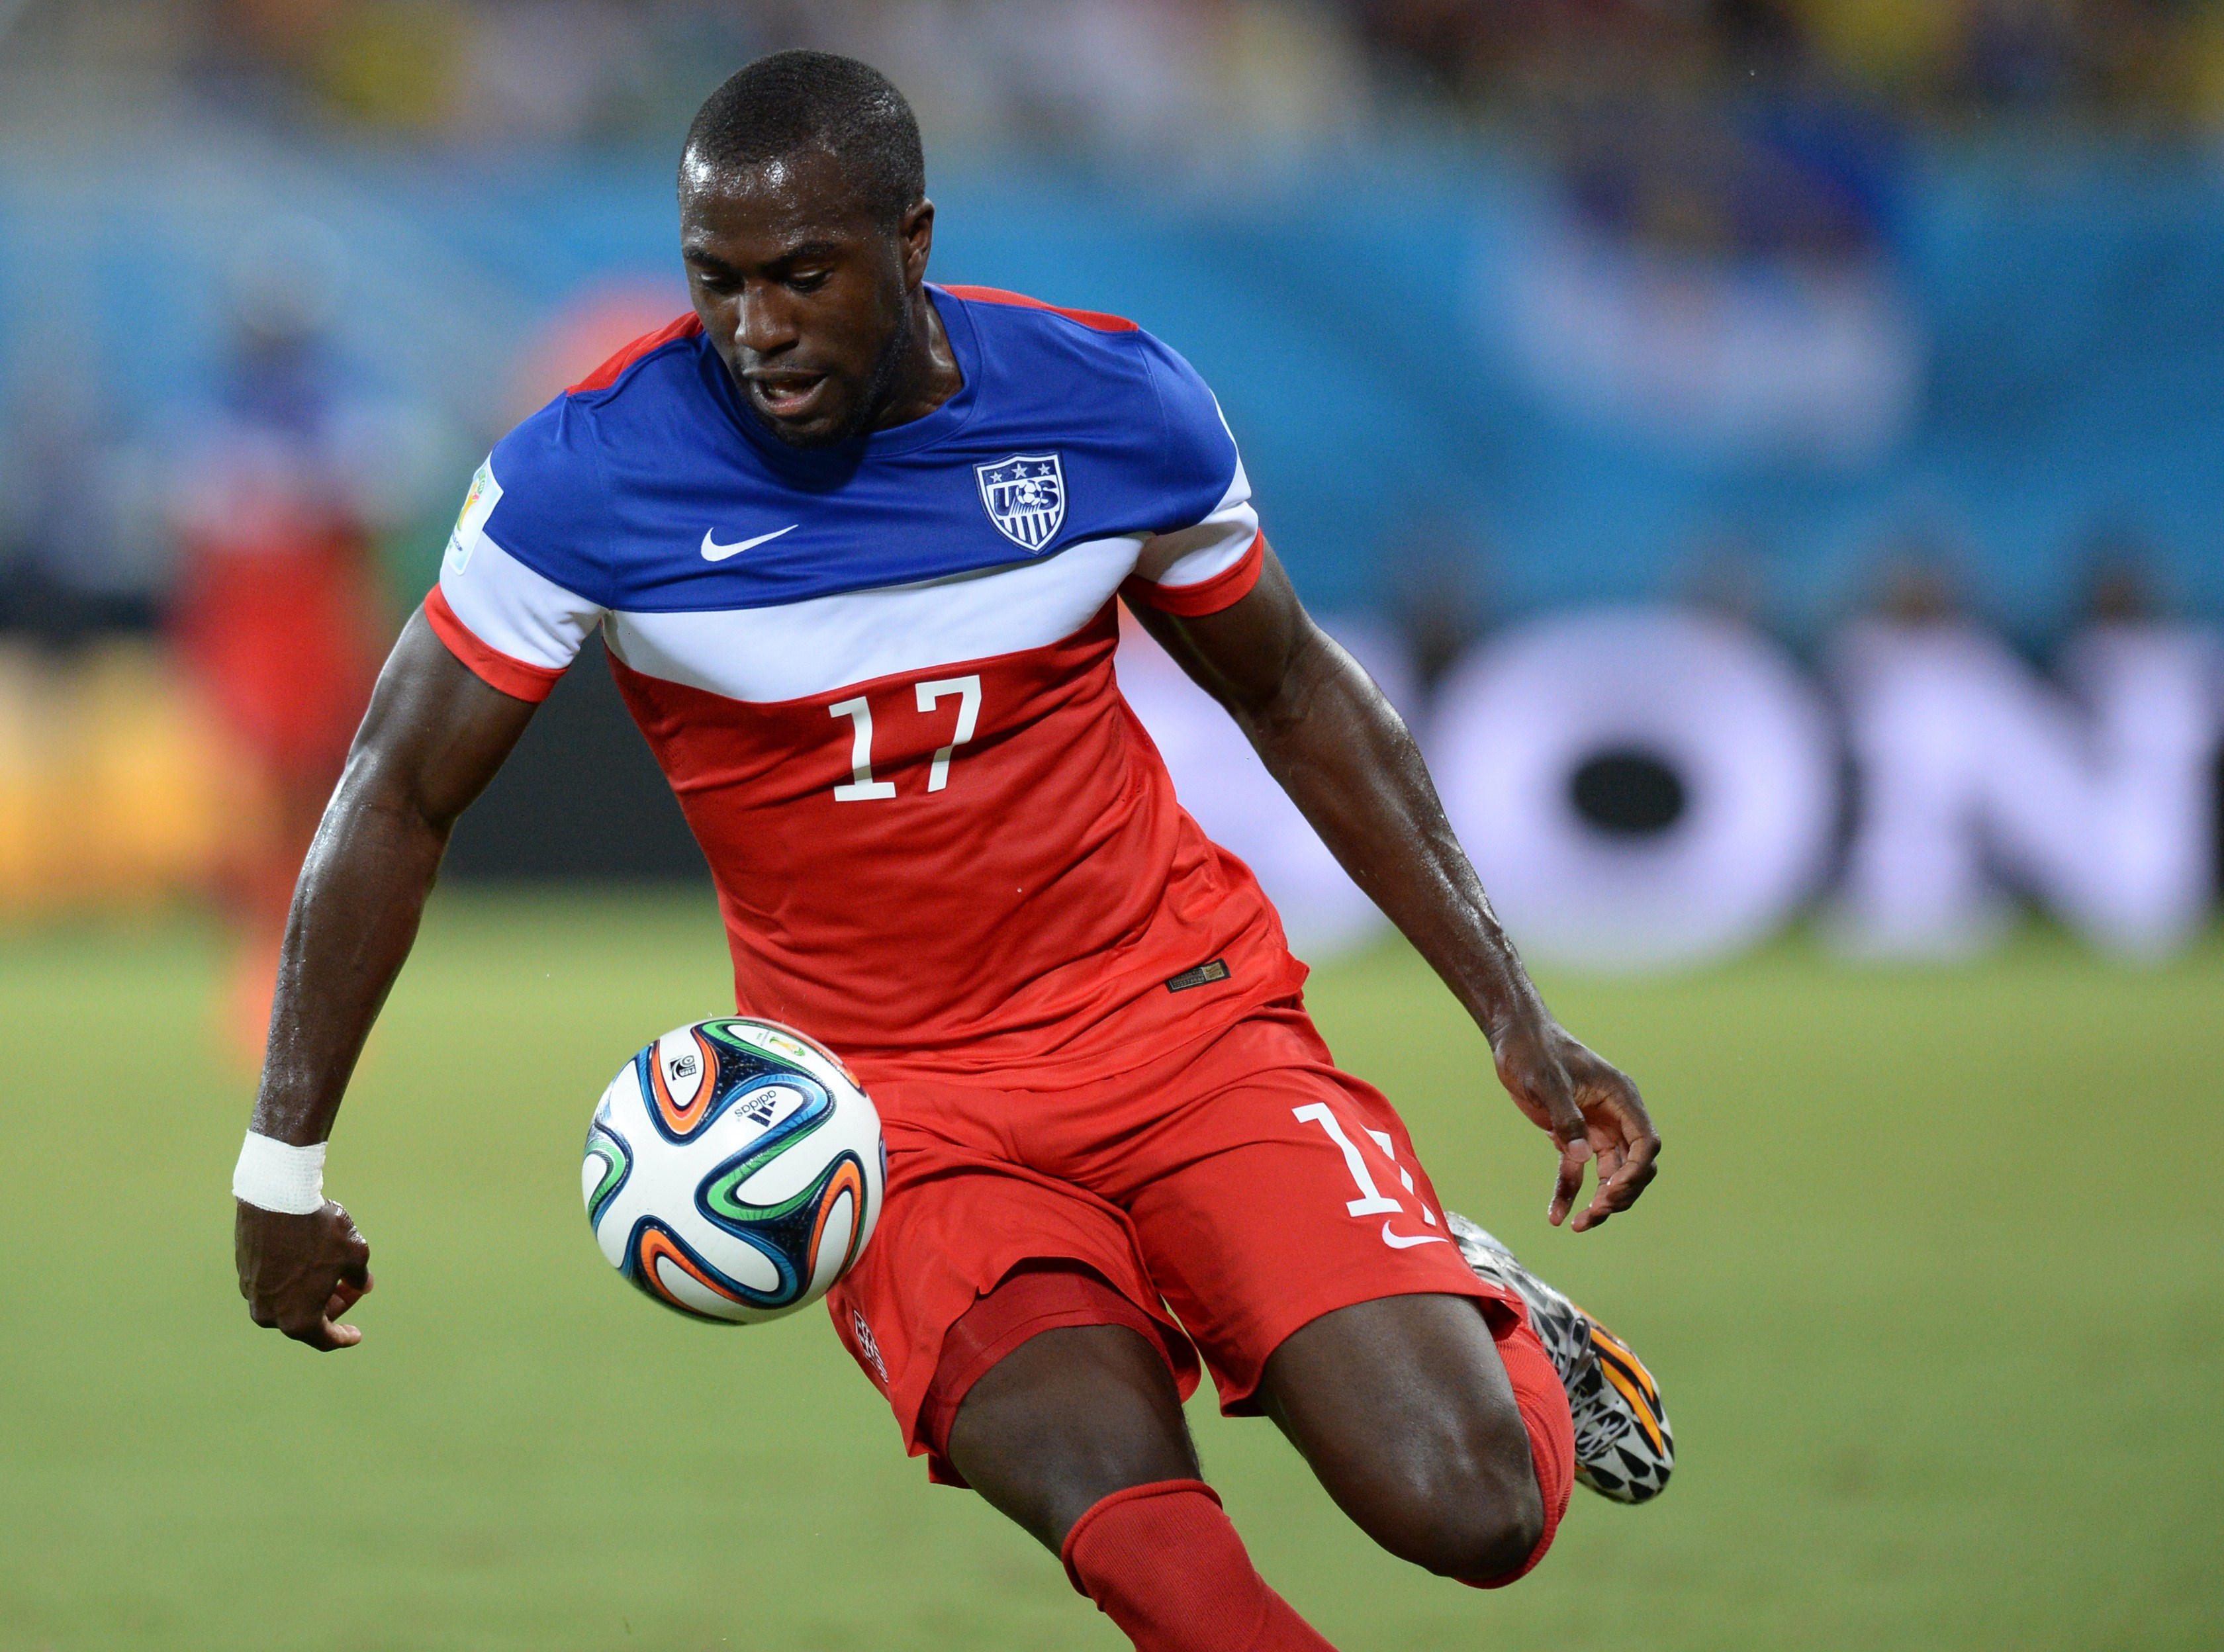 US forward Jozy Altidore controls the ball during a Group G football match between Ghana and US at the Dunas Arena in Natal during the 2014 FIFA World Cup on June 16, 2014.   AFP PHOTO / CARL DE SOUZA        (Photo credit should read CARL DE SOUZA/AFP/Getty Images) (CARL DE SOUZA&mdash;AFP/Getty Images)